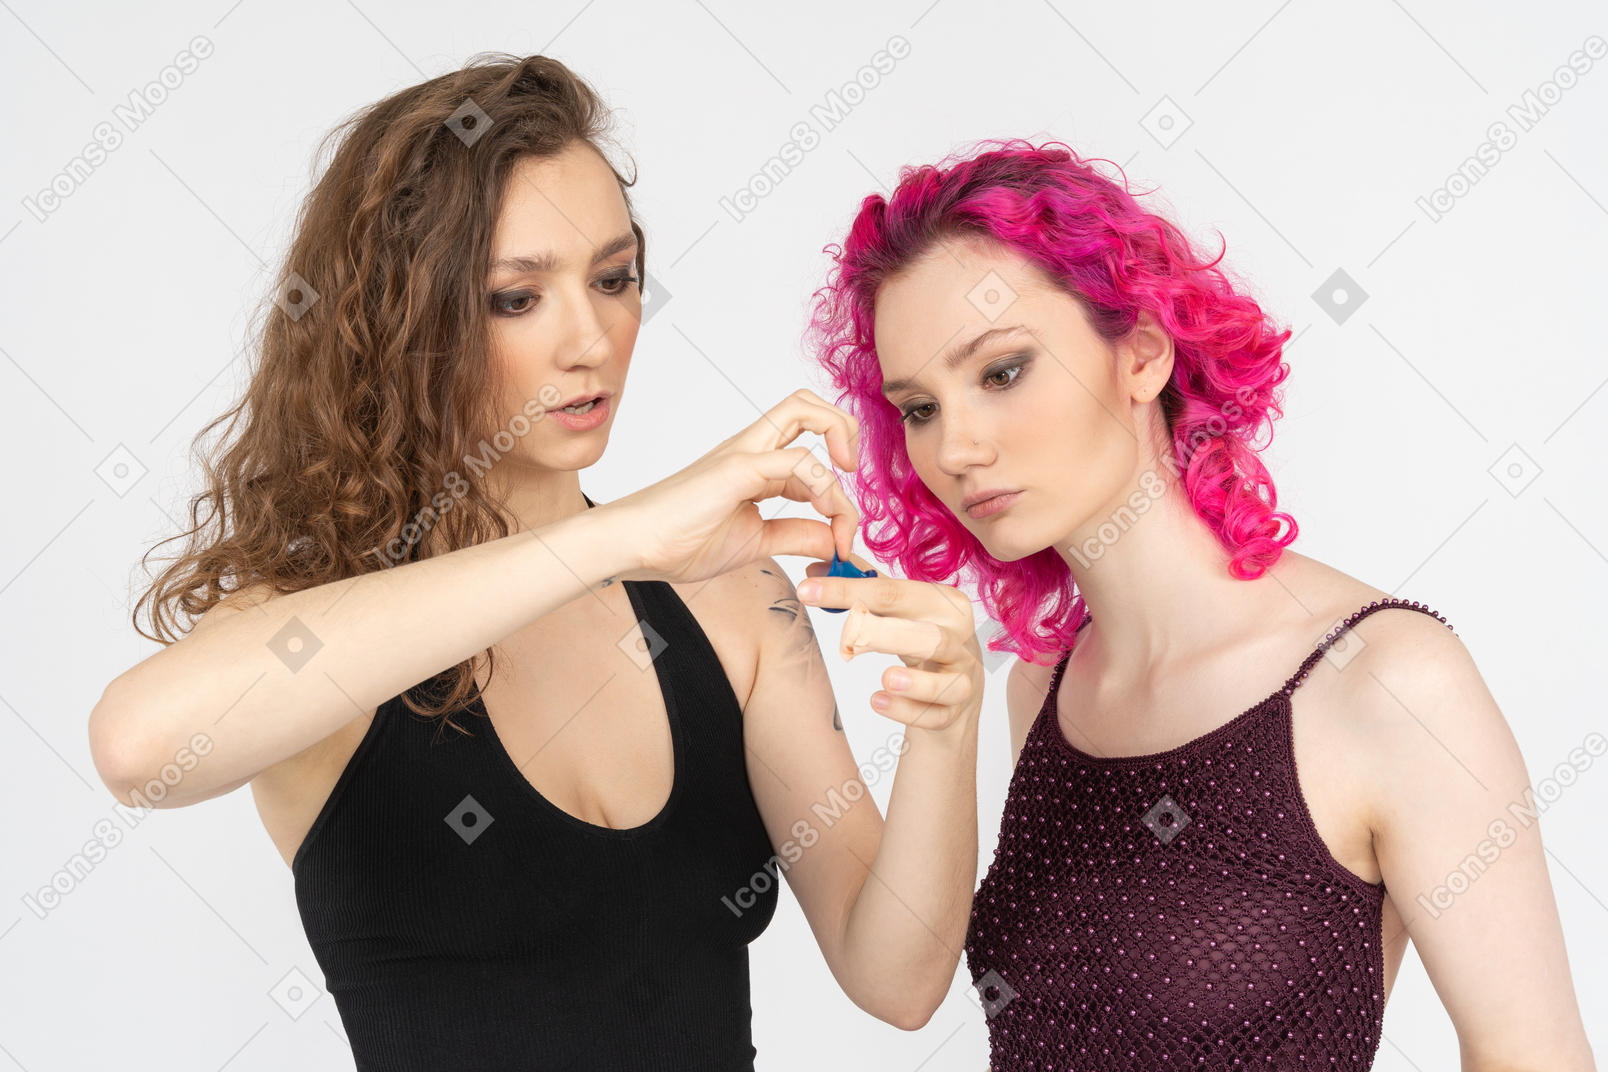 Elder sister teaching younger one to use condoms